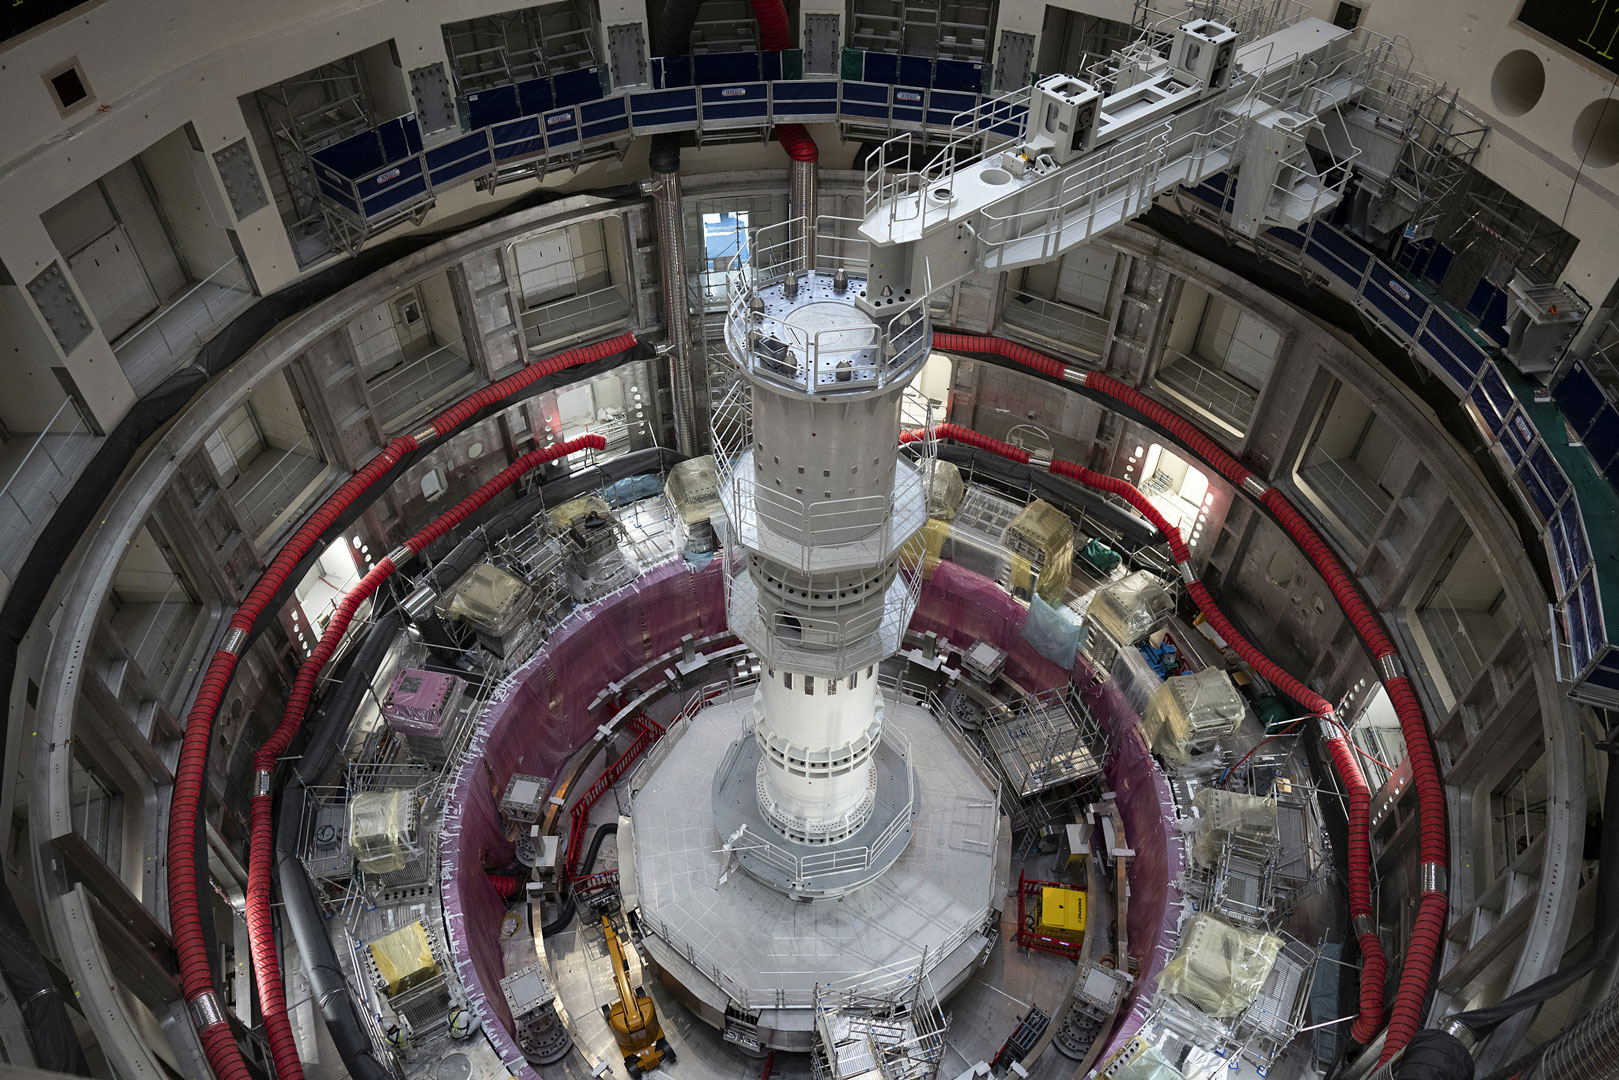 The ITER Tokamak machine is pictured in Saint-Paul-Lez-Durance, France, September 9, 2021. /CFP